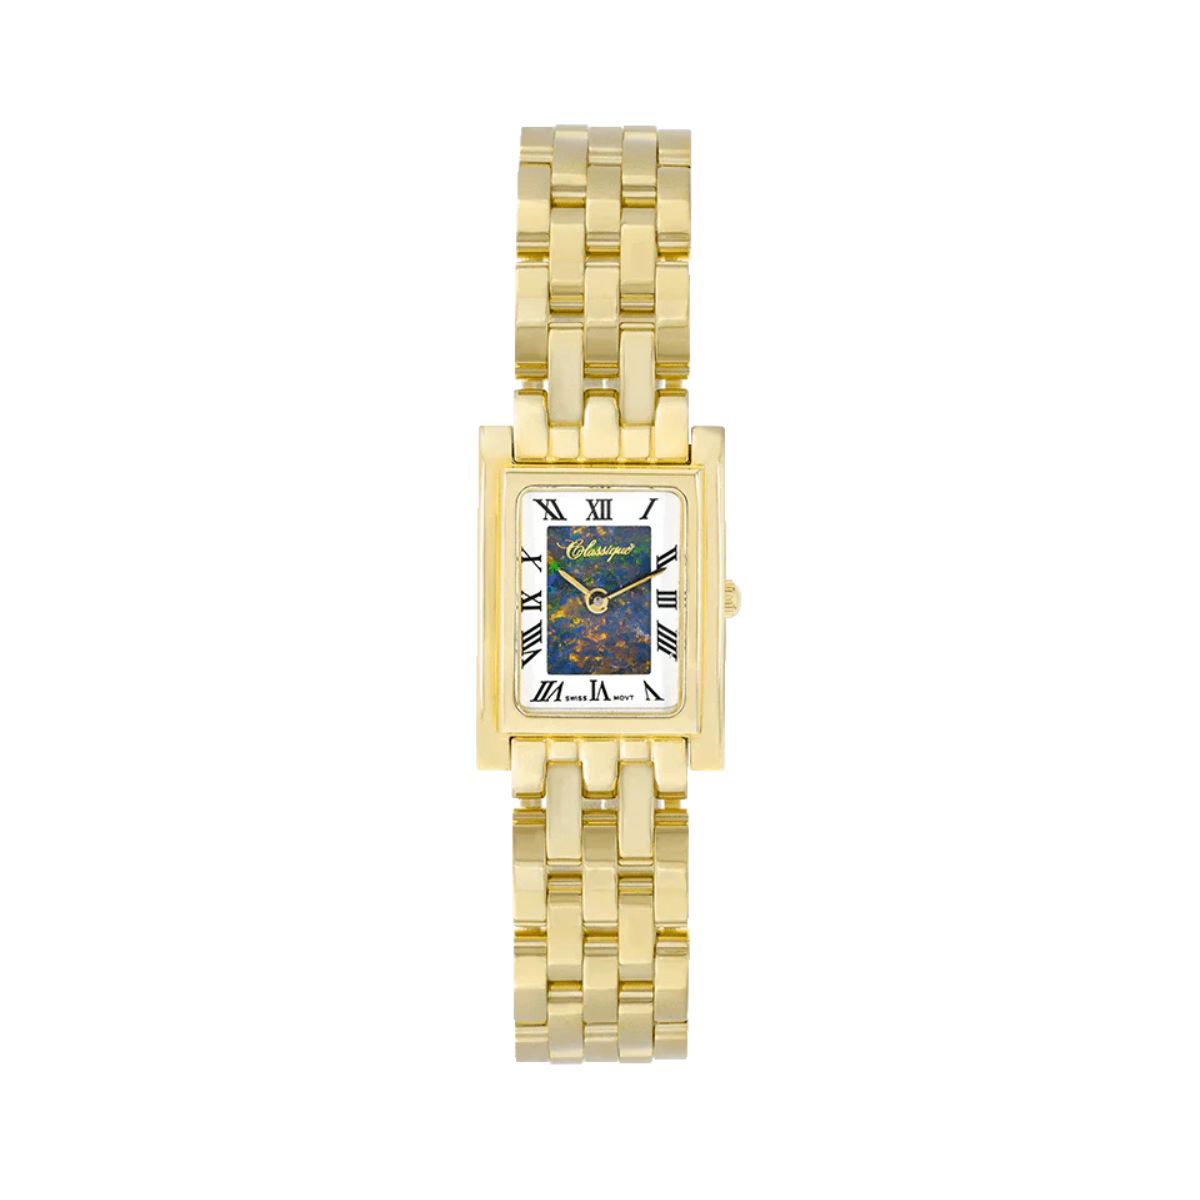 The Lilah Opal Watch is a beautiful staple piece. It features a 20x30mm rectangular face set on a 14kt yellow gold-plated stainless steel bracelet band. This women's luxury watch is fitted with a Swiss Quartz movement and is ideal for combining fashion and time.